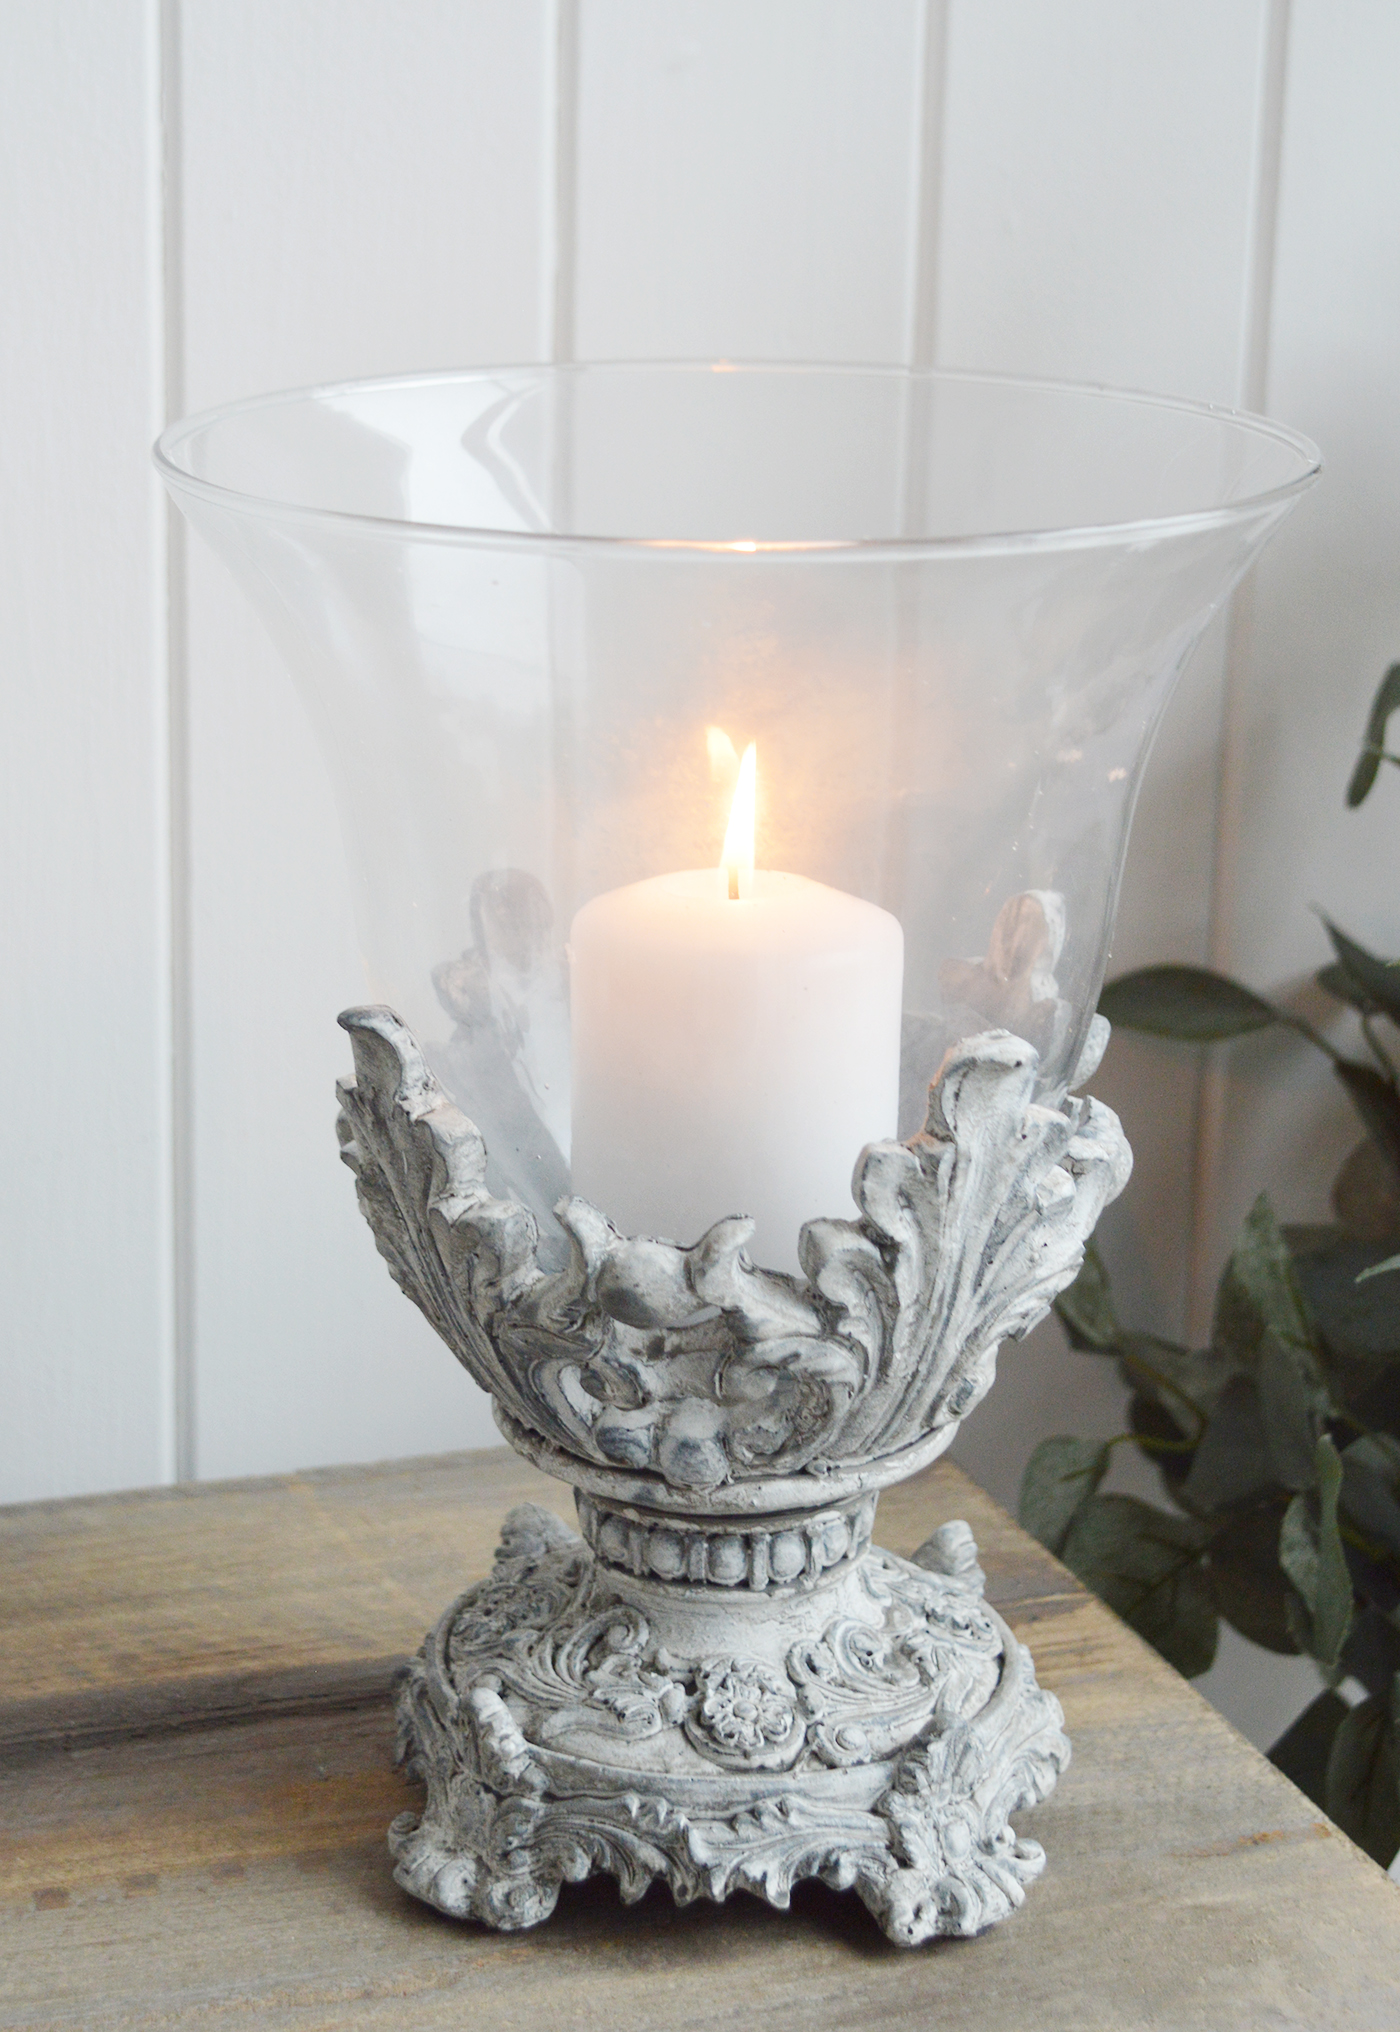 Richmond candle holder - New England Style Home Accessories for coastal, country and city homes and Interiors. The White Lighthouse Furniture